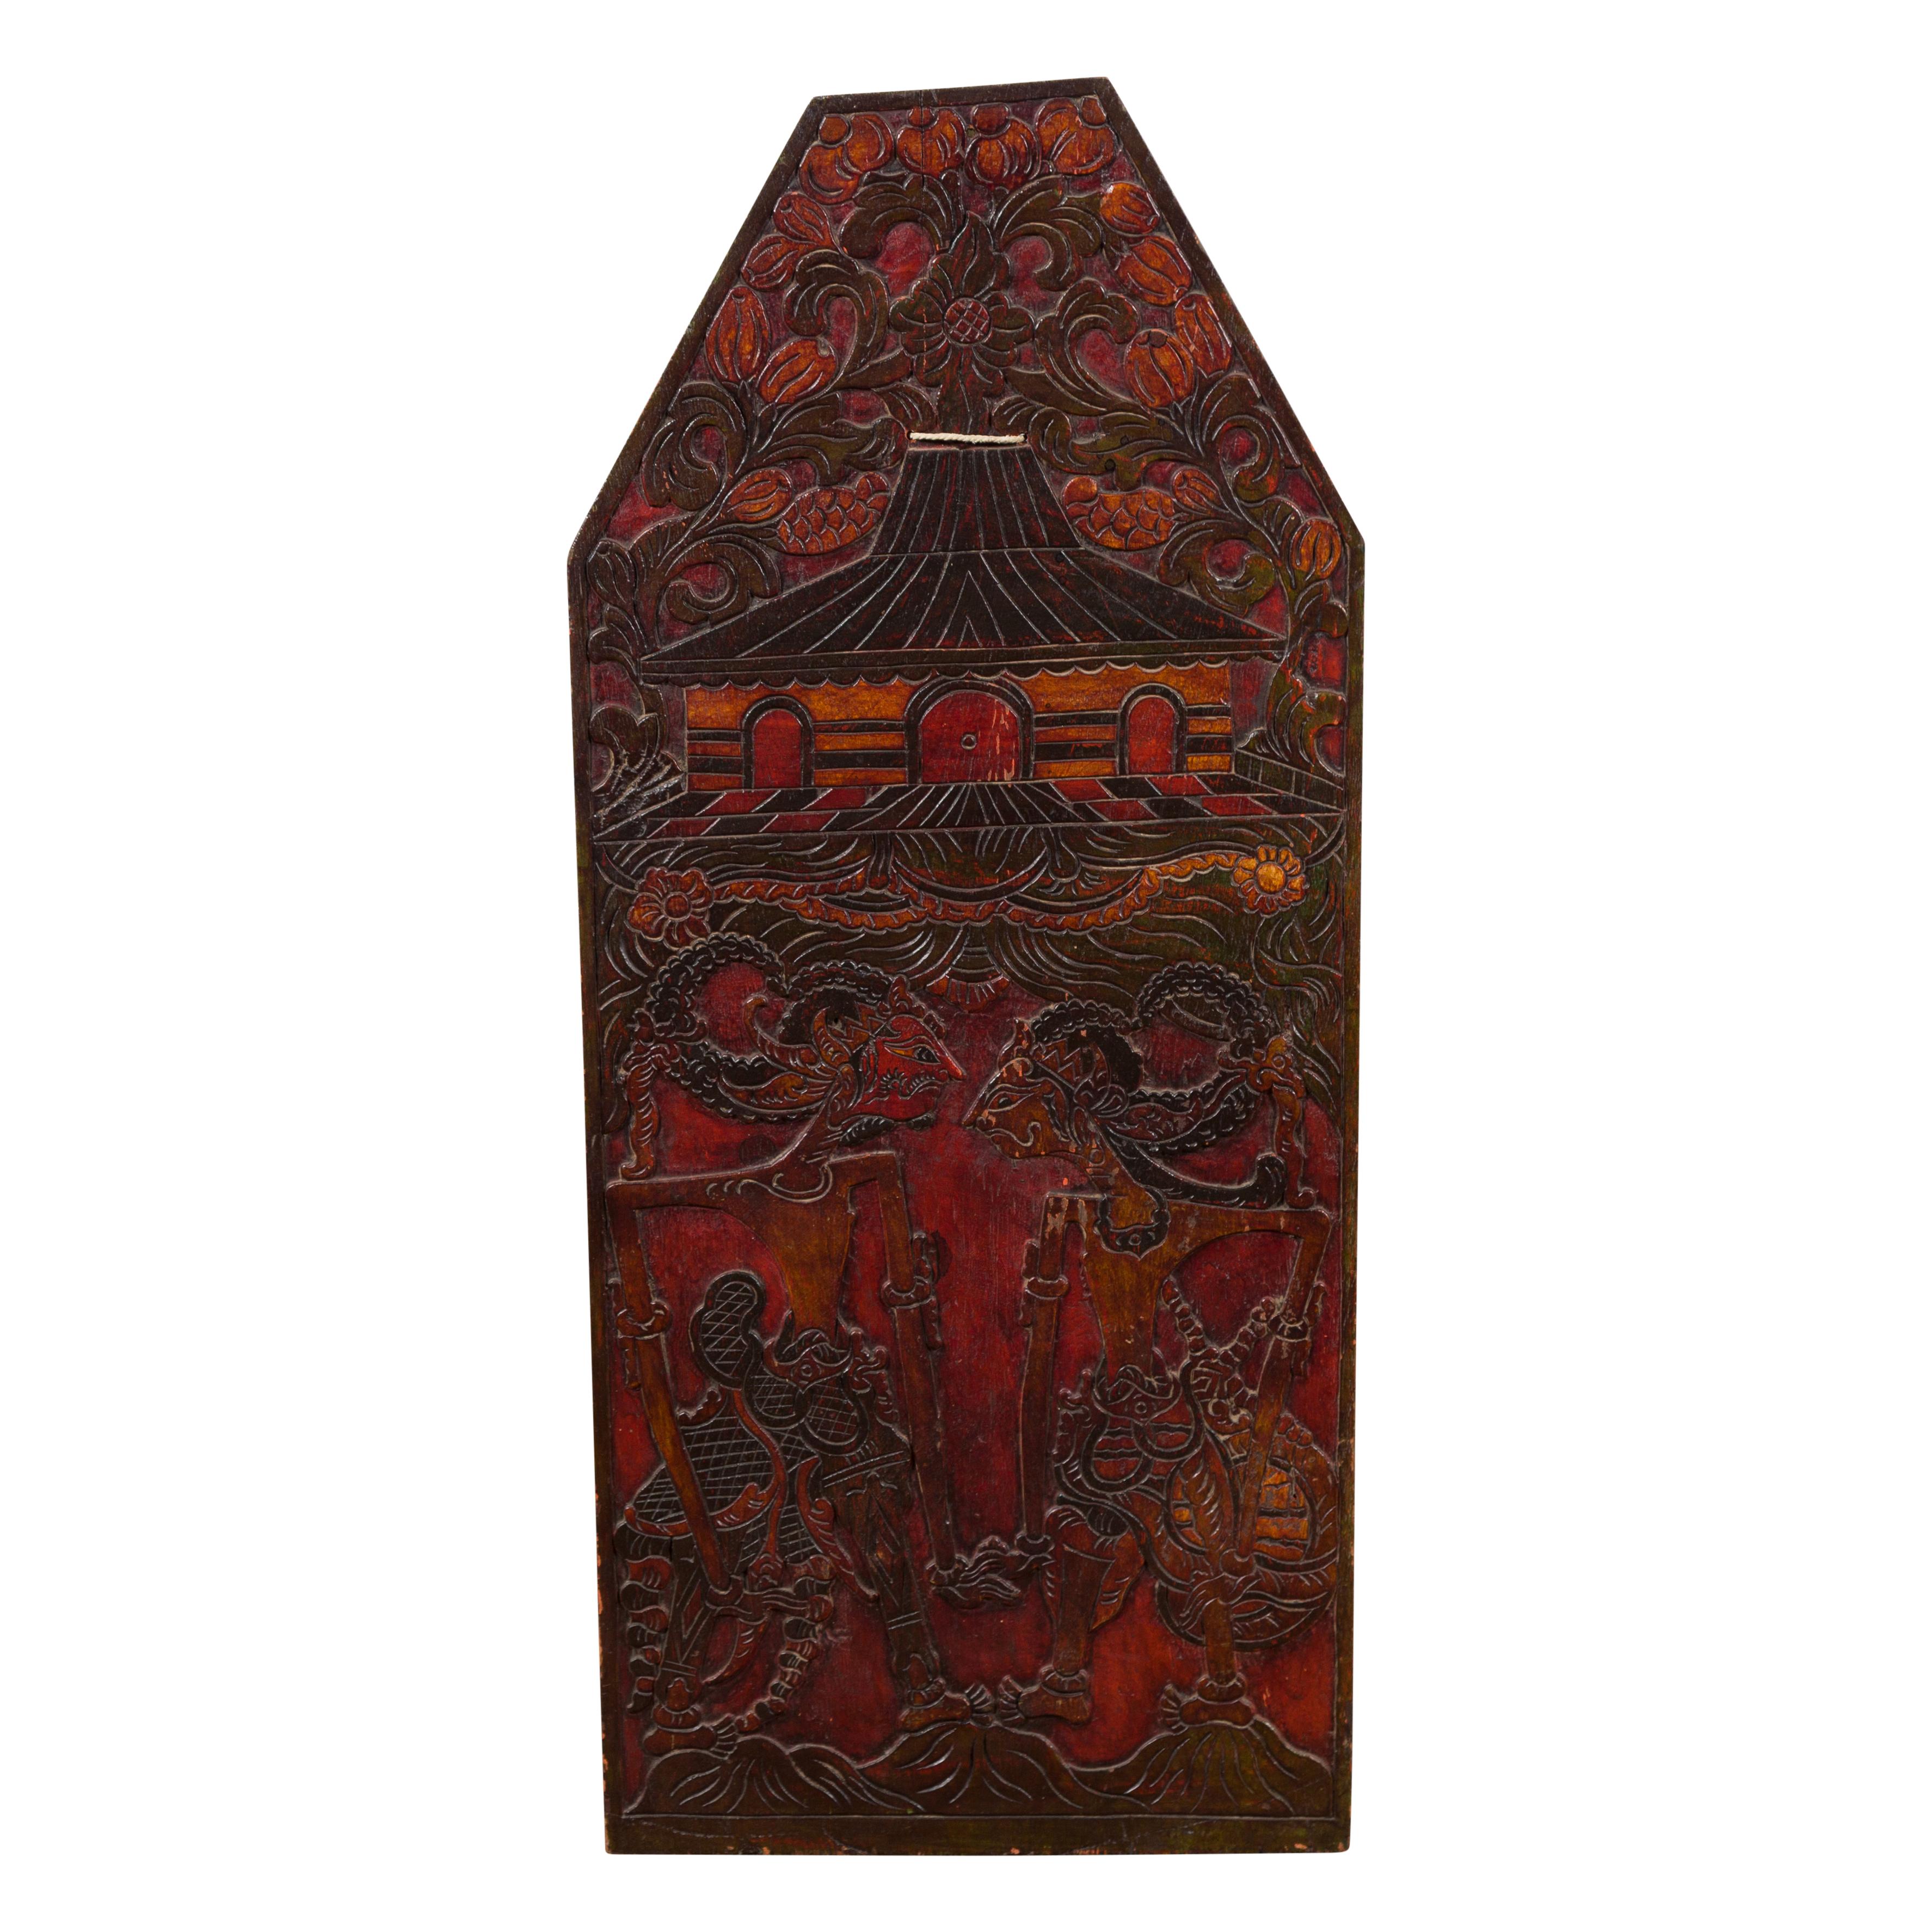 A Burmese hand-carved wooden puppet show sign from the 19th century, with red and black painted accents as well as puppets, architecture and foliage carved in low relief. This Burmese 19th century sign was hand-carved in Burma (nowadays called